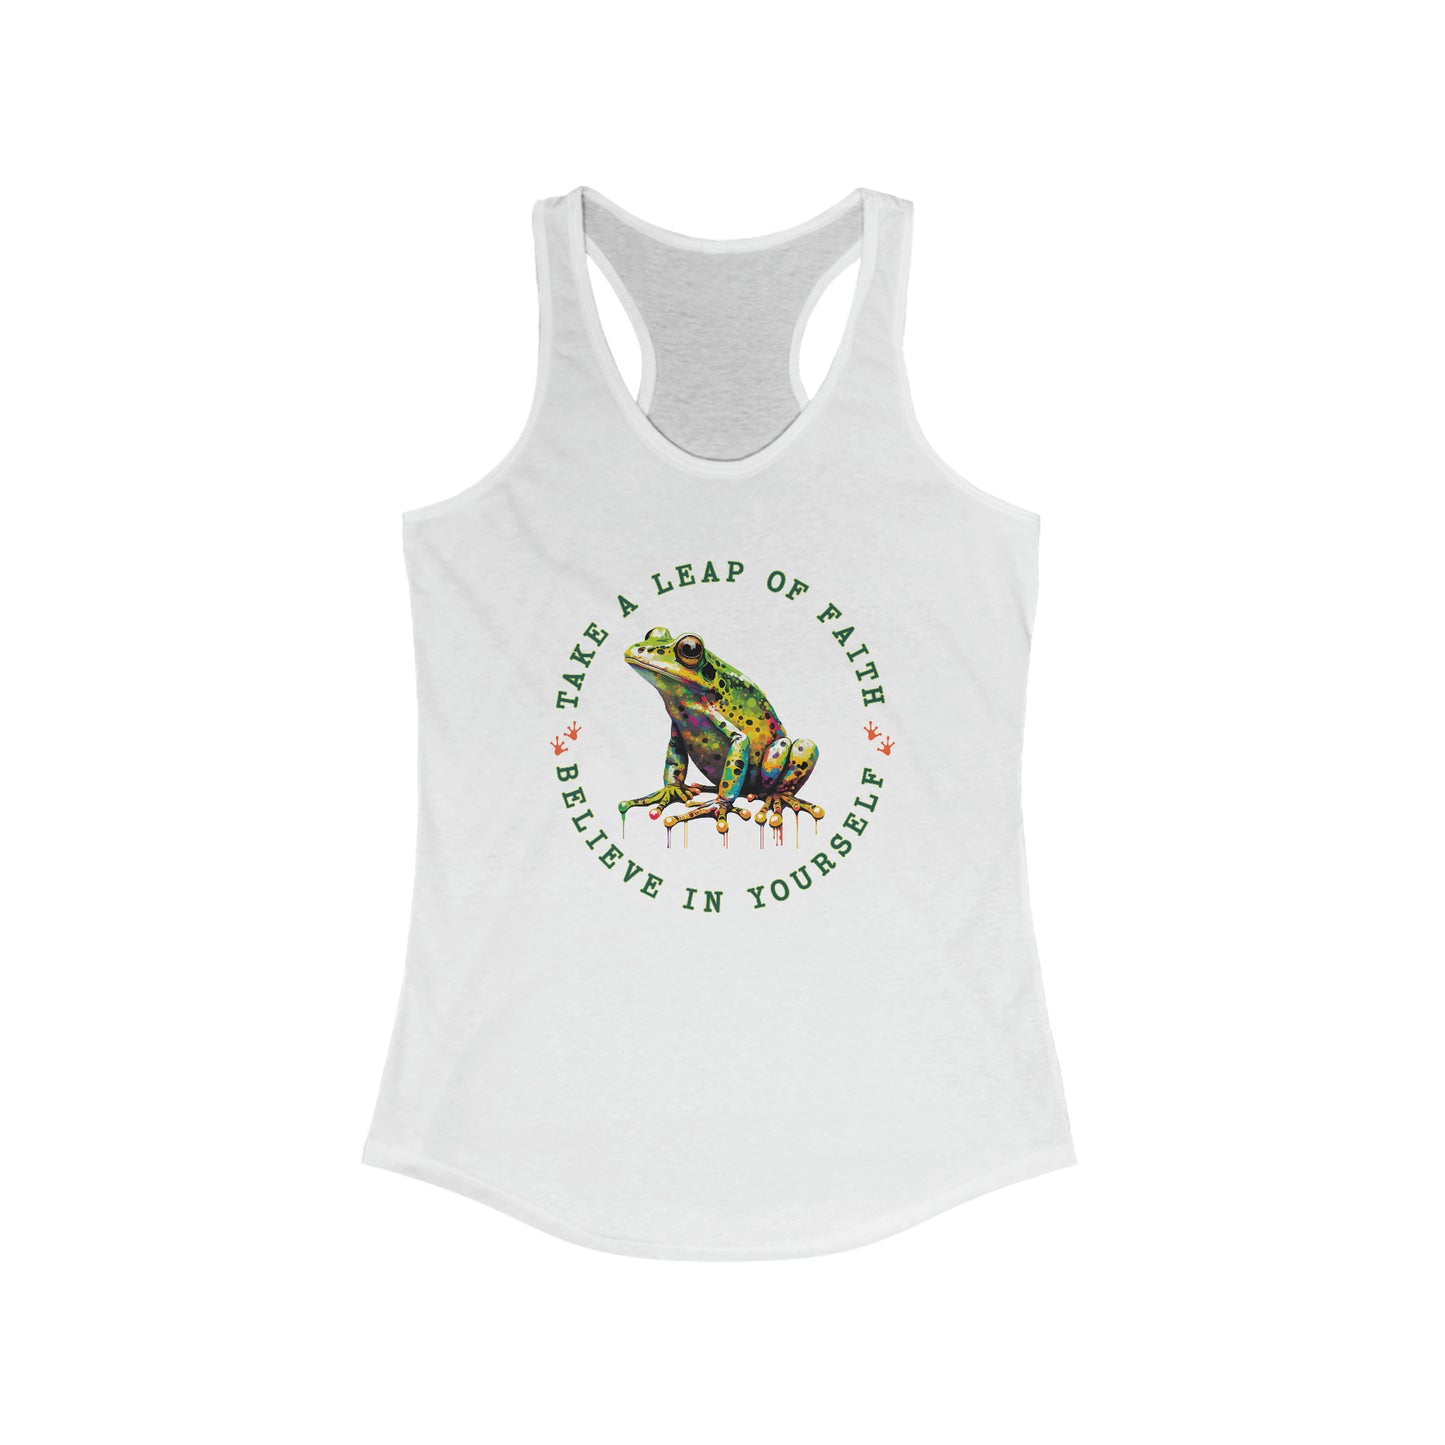 Frog Tank Top For Take A Leap Of Faith Shirt For Believe In Yourself Shirt For Lucky Frog Tank Top For Woman Tank Top With Cute Frog Shirt For Gift